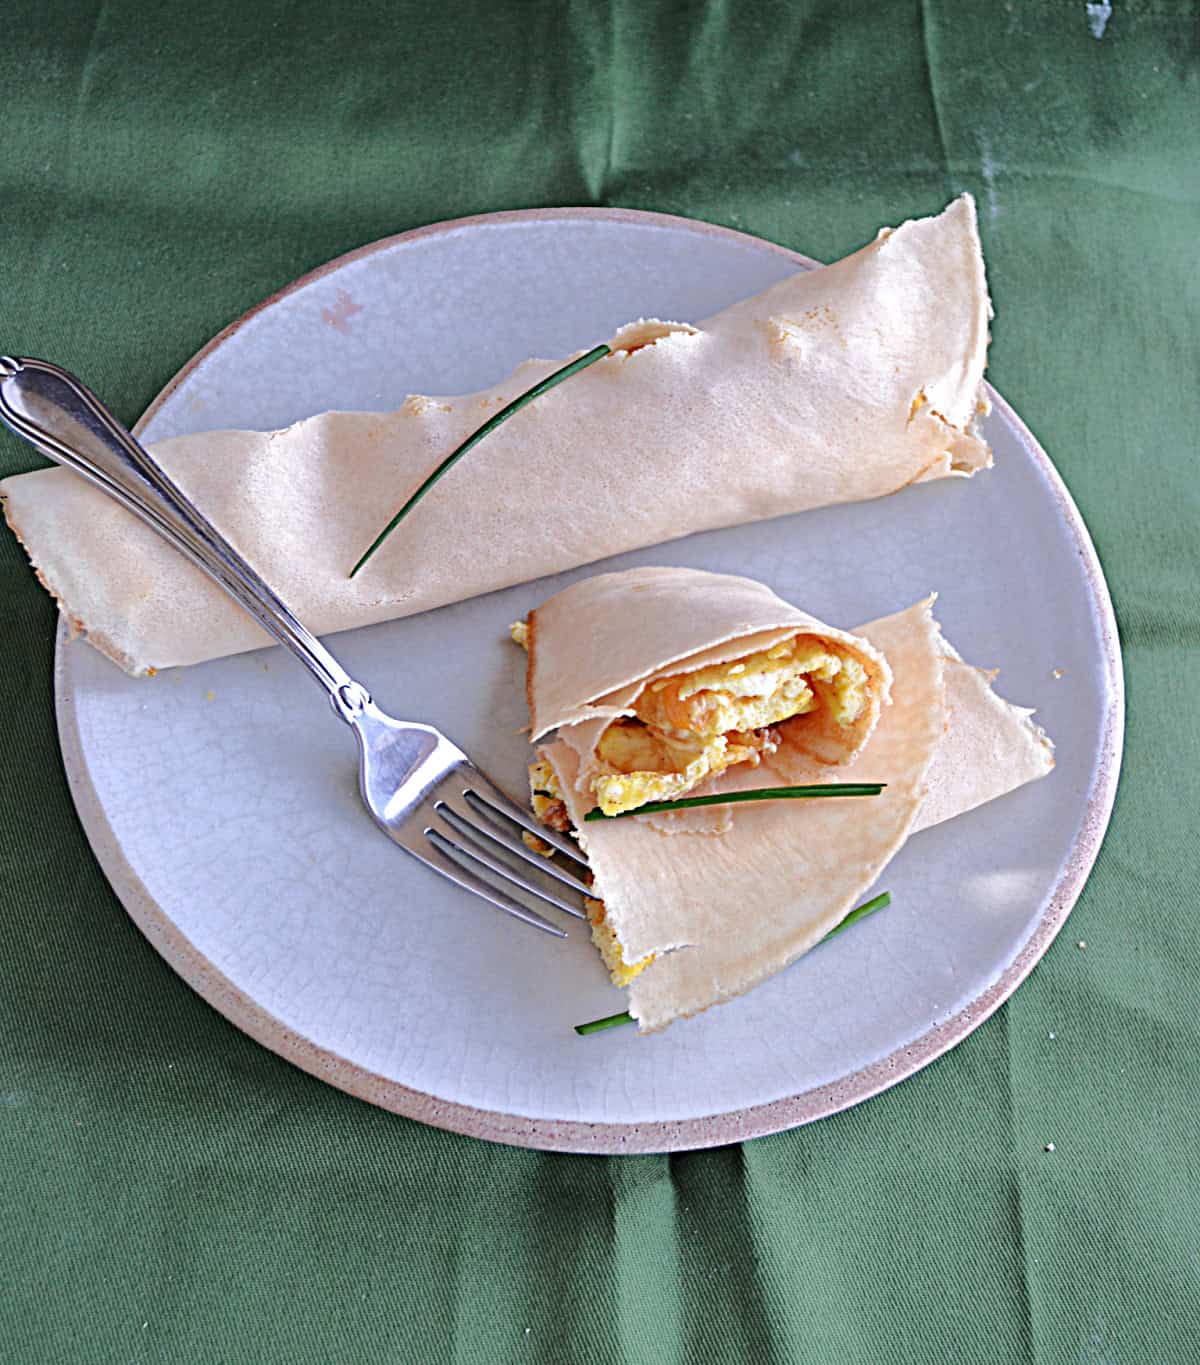 A plate with one whole crepe and one crepe cut in half to show the filling inside.